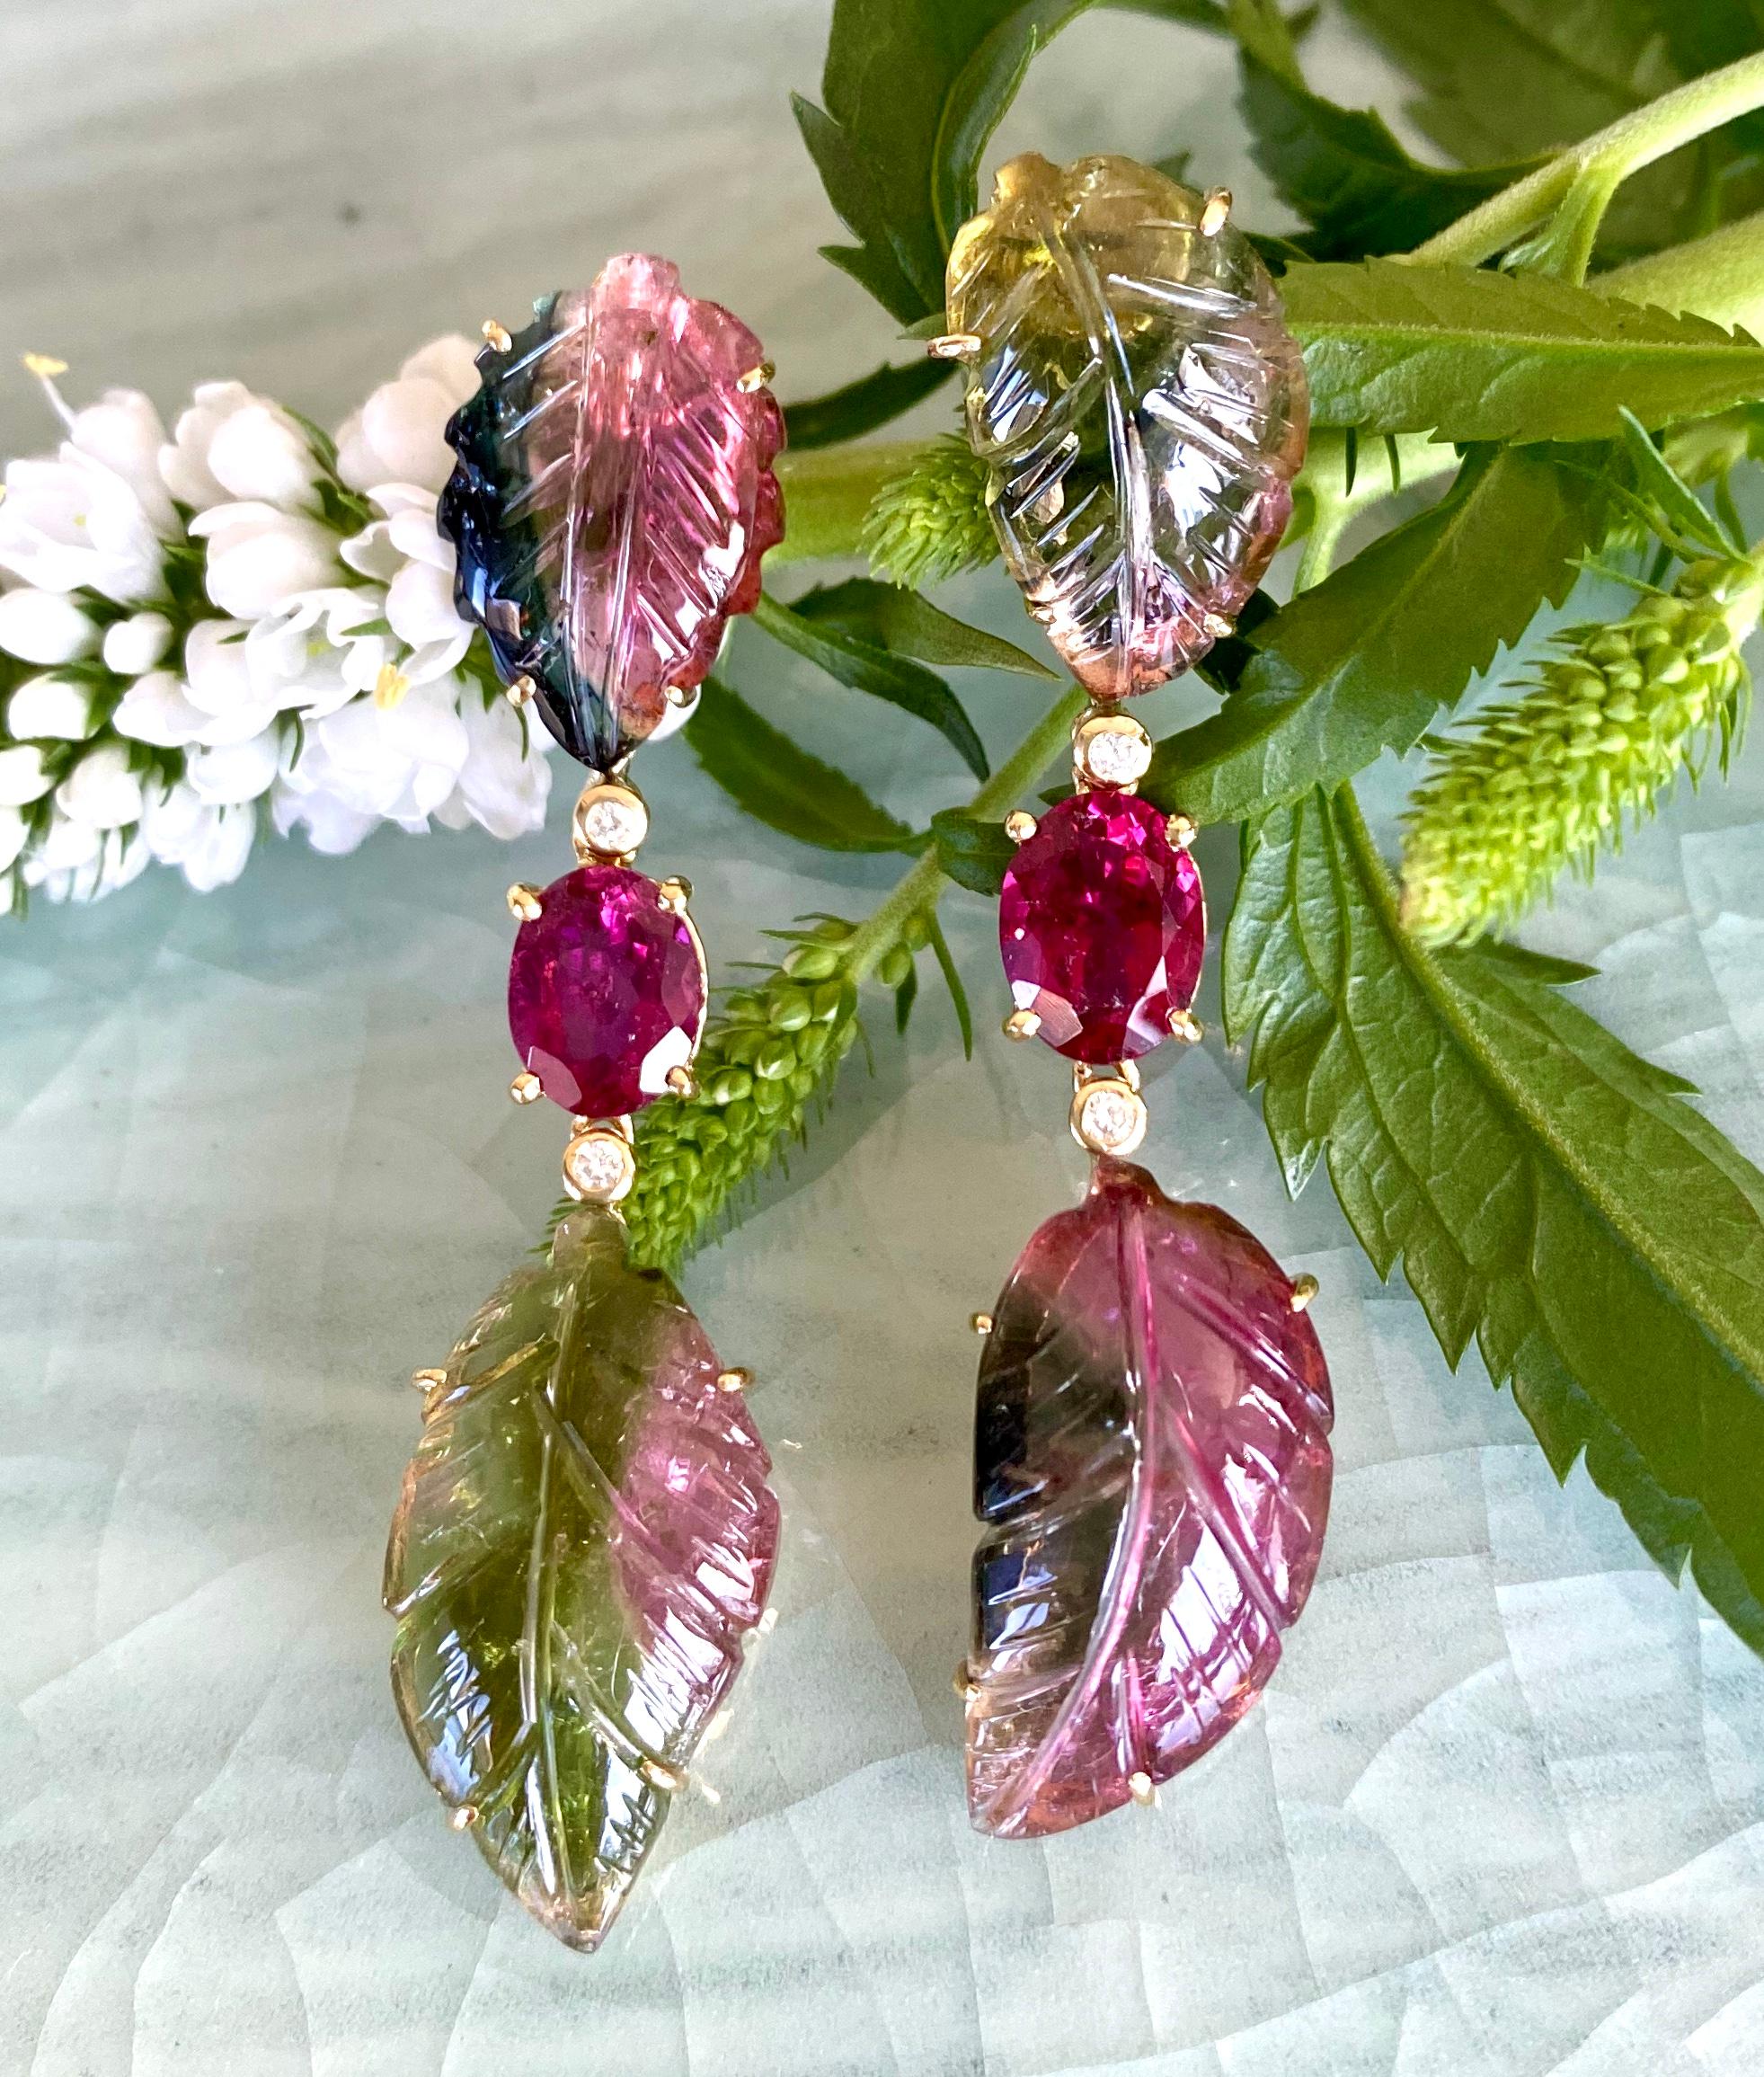 Carved bicolor tourmaline leaves, rubellite tourmalines and diamond earrings, handcrafted in 18 karat yellow gold.

These exquisite truly one-of-a-kind carved leaf earrings of unique bicolor tourmalines and vibrant rubellites are an exquisite